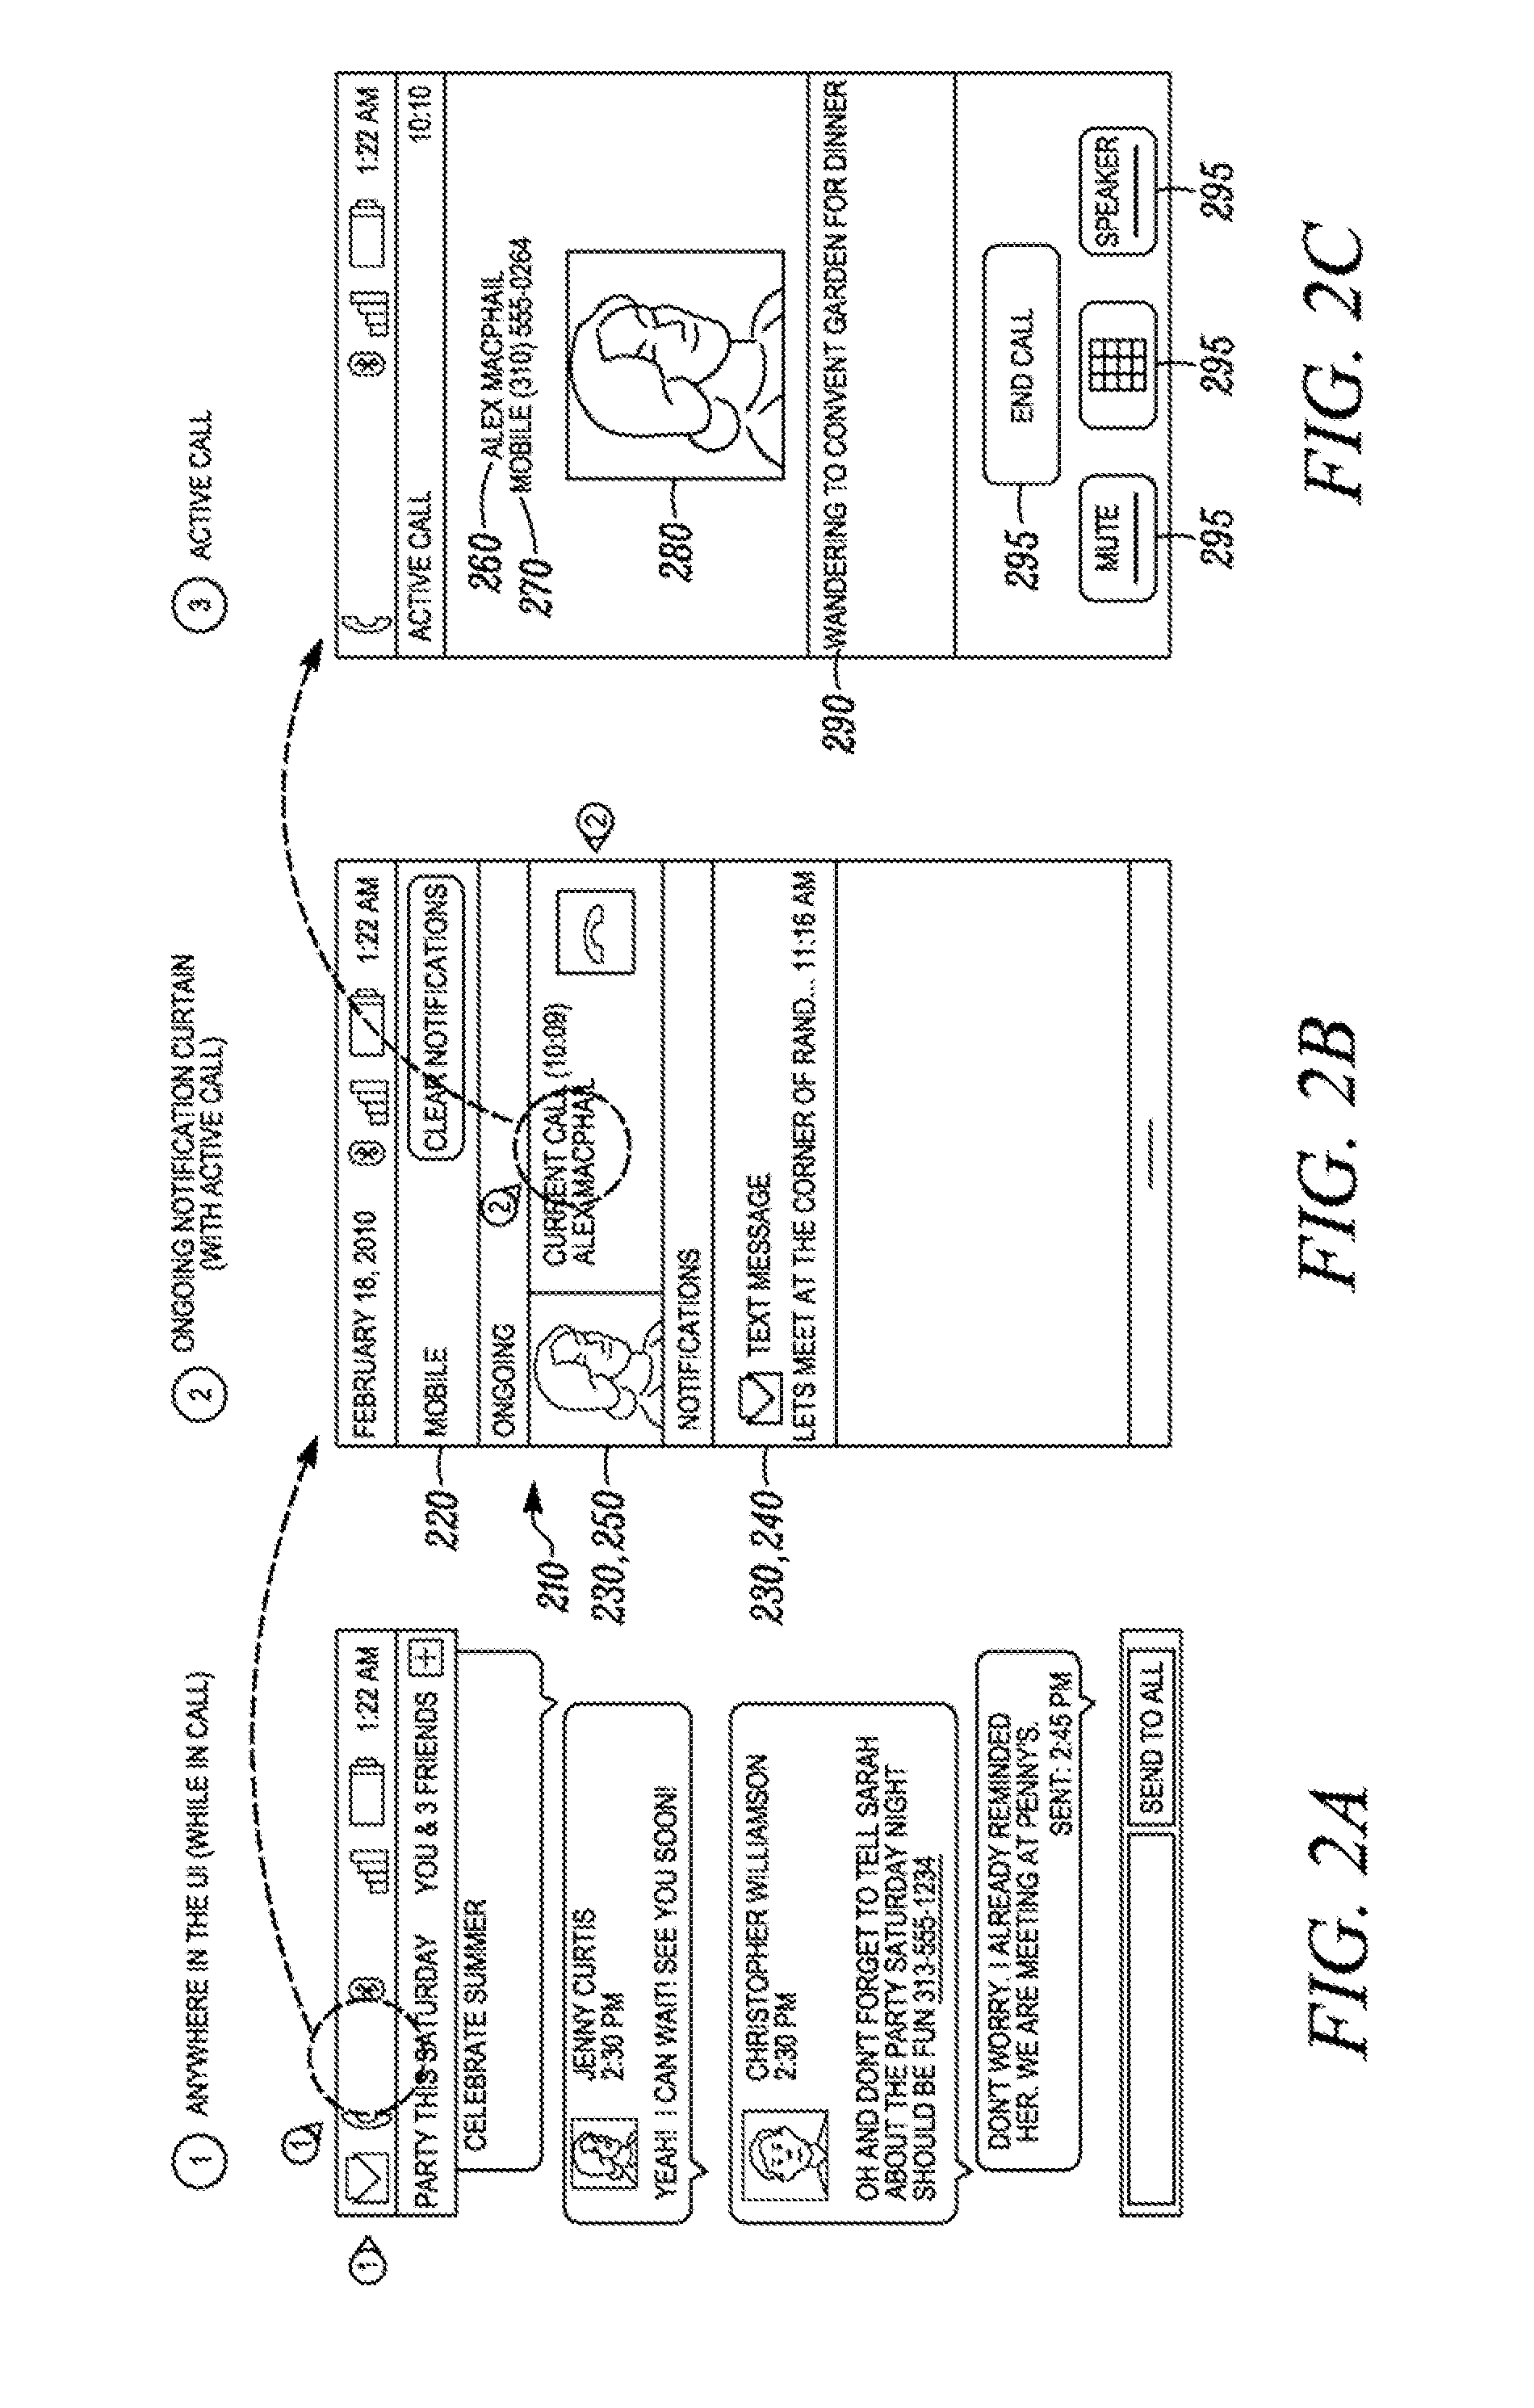 Method of a Wireless Communication Device for Managing Status Components for Global Call Control